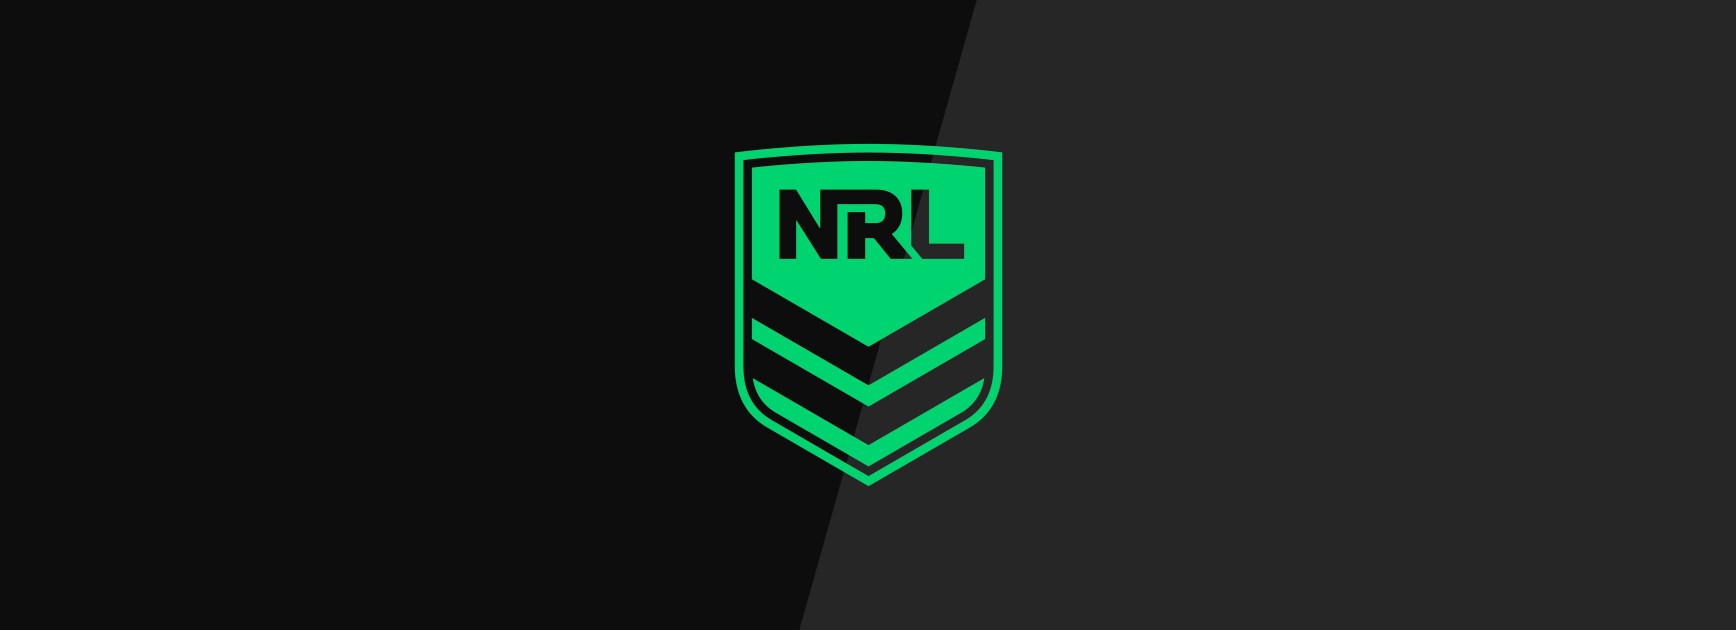 Players ready for NRL return